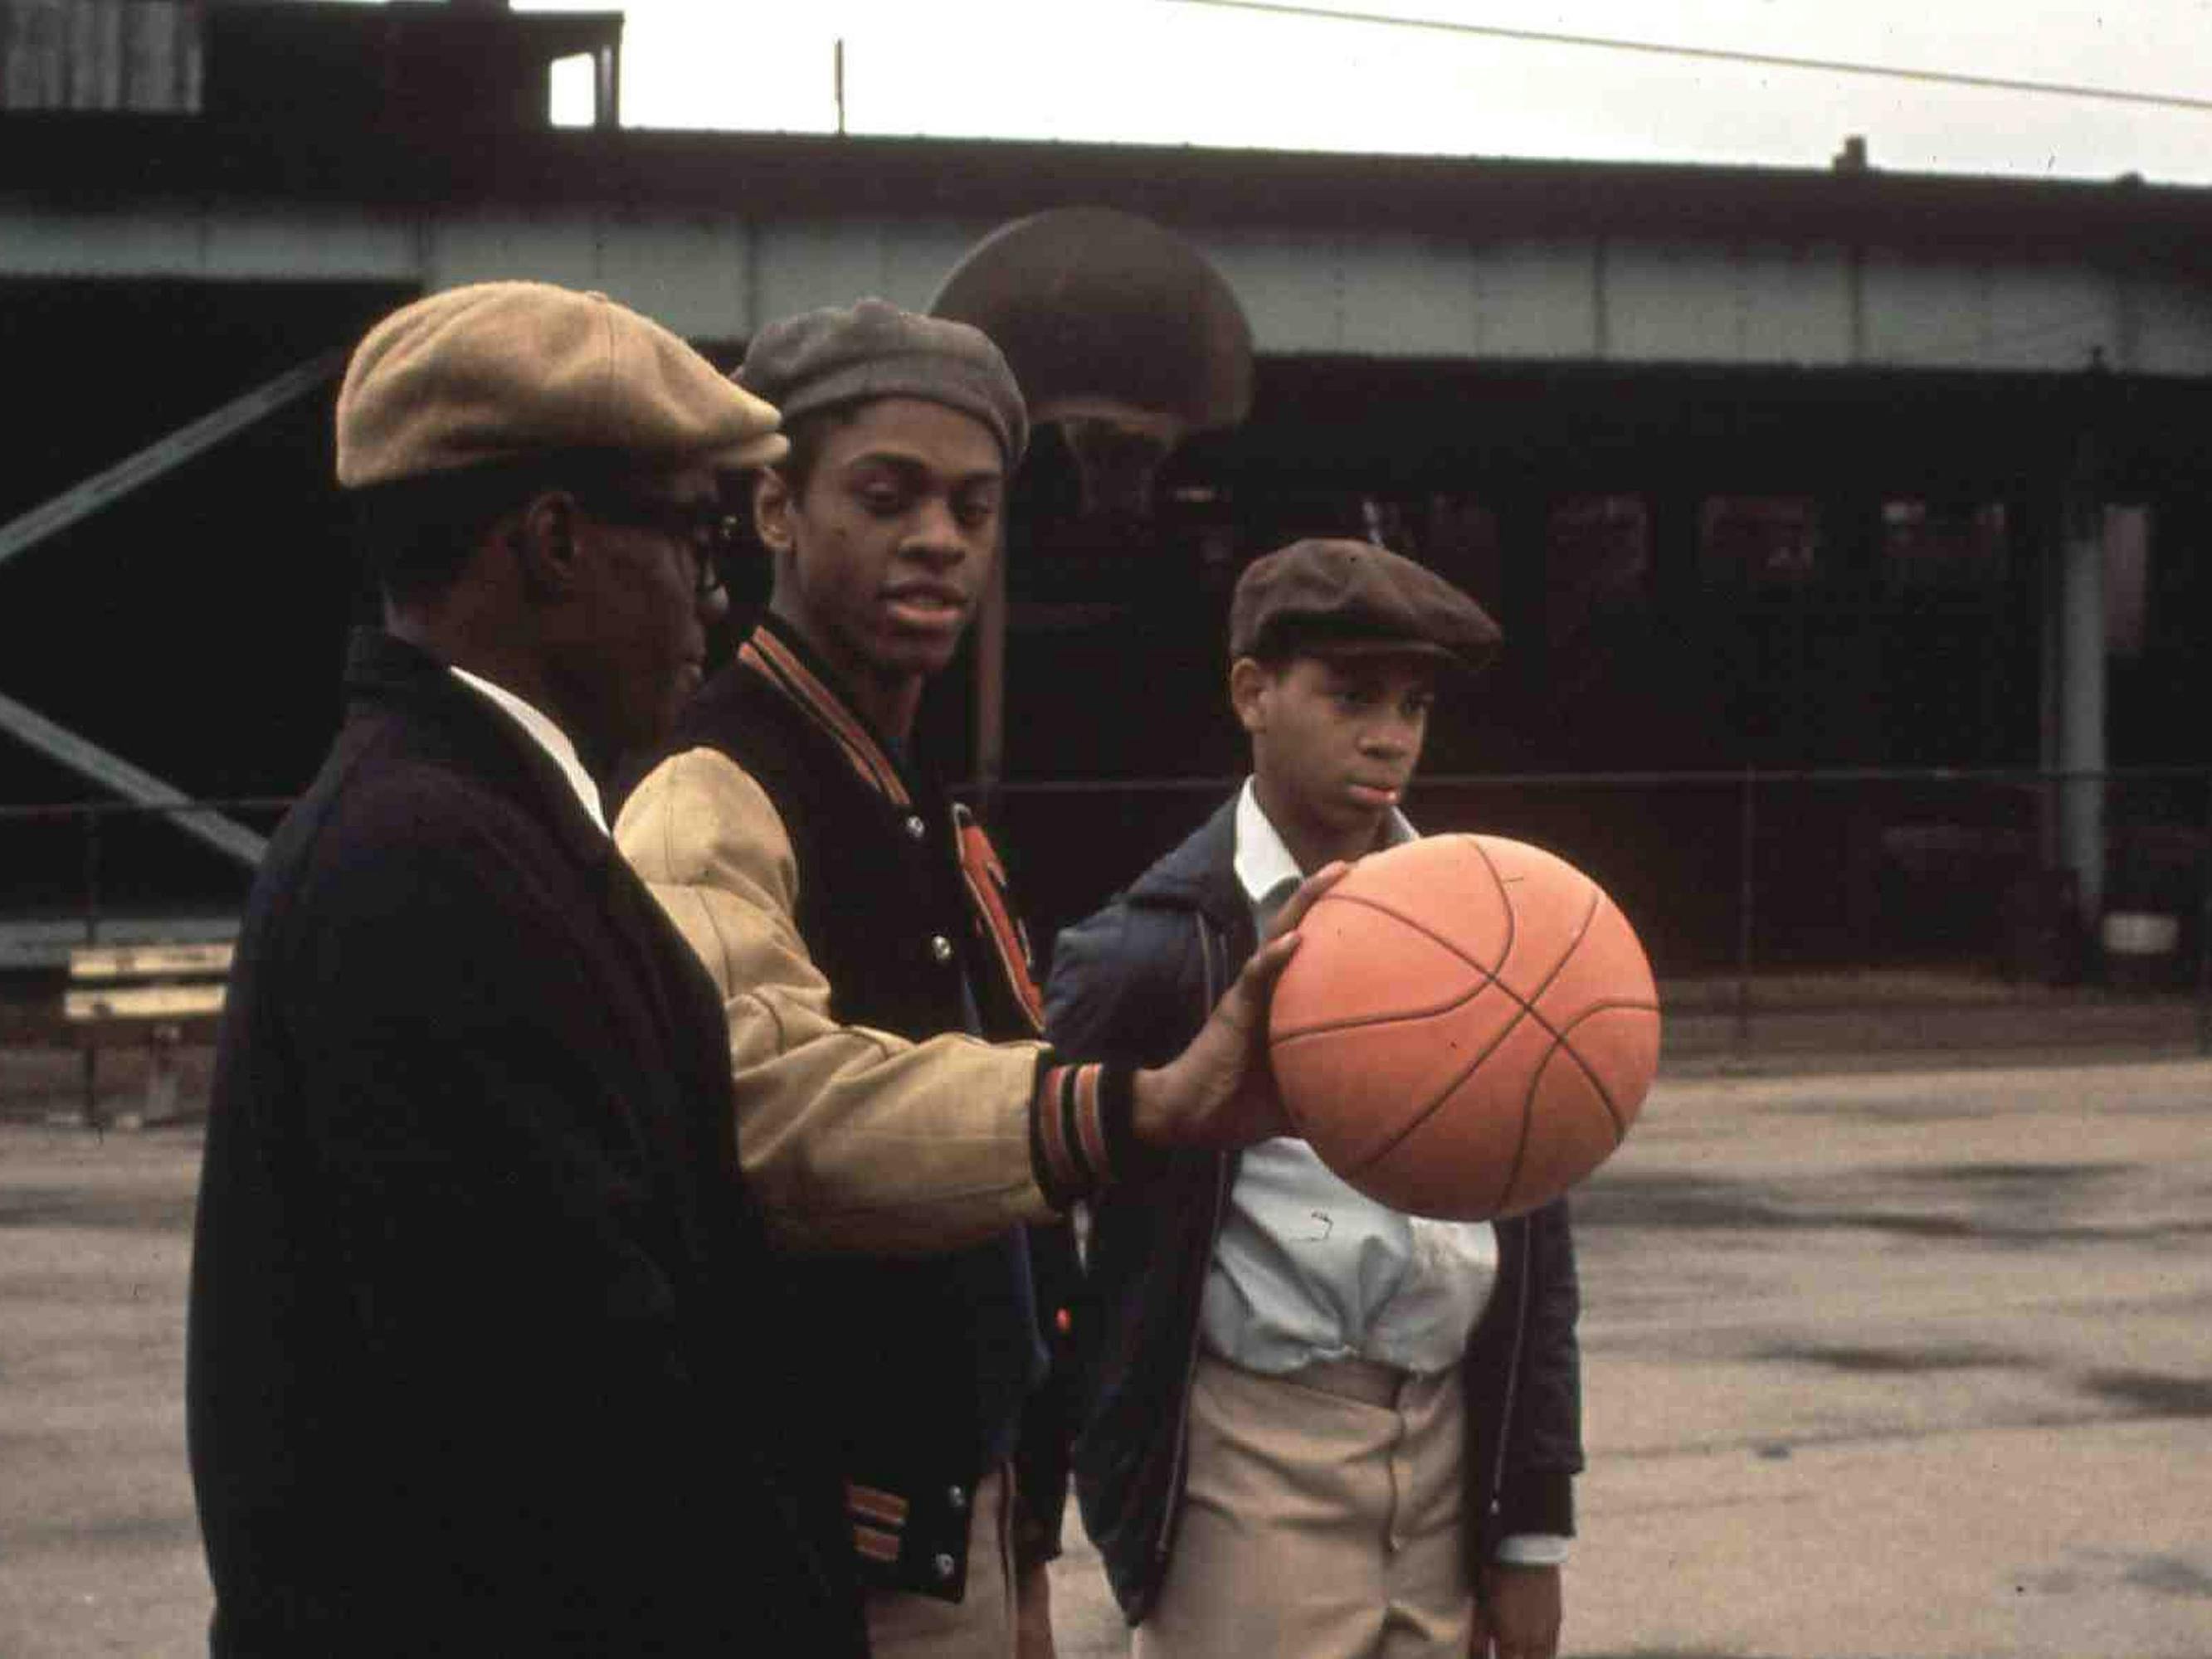 Preach (Glynn Turman), Cochise (Lawrence-Hilton Jacobs), and Pooter (Corin Rogers) hang out on a basketball court. 